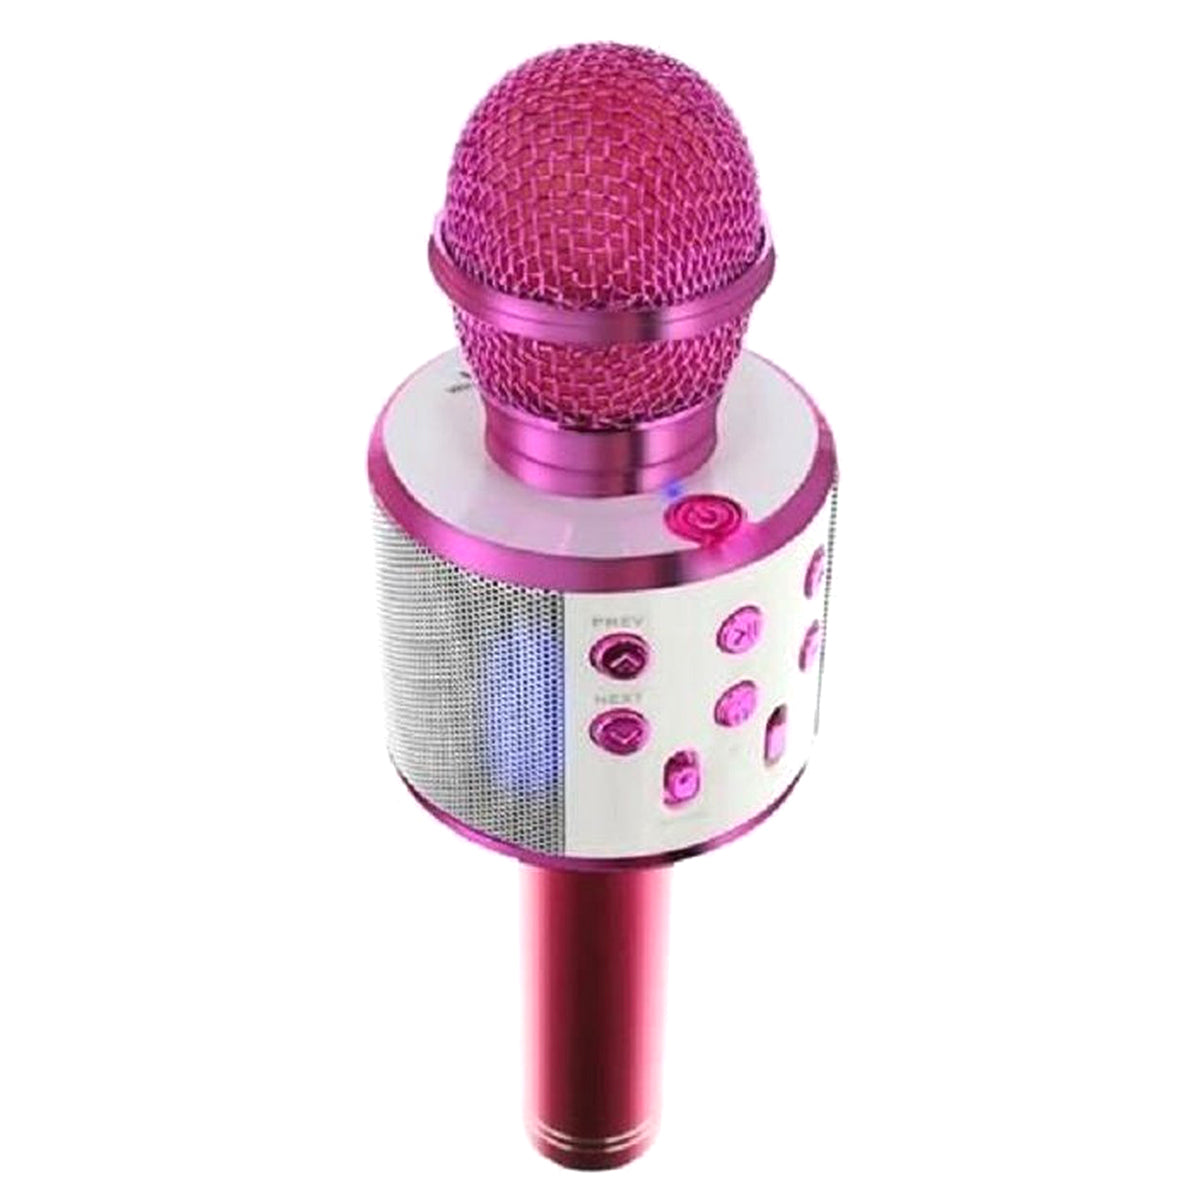 Wireless Karaoke Microphone with Speaker and Bluetooth - Pink